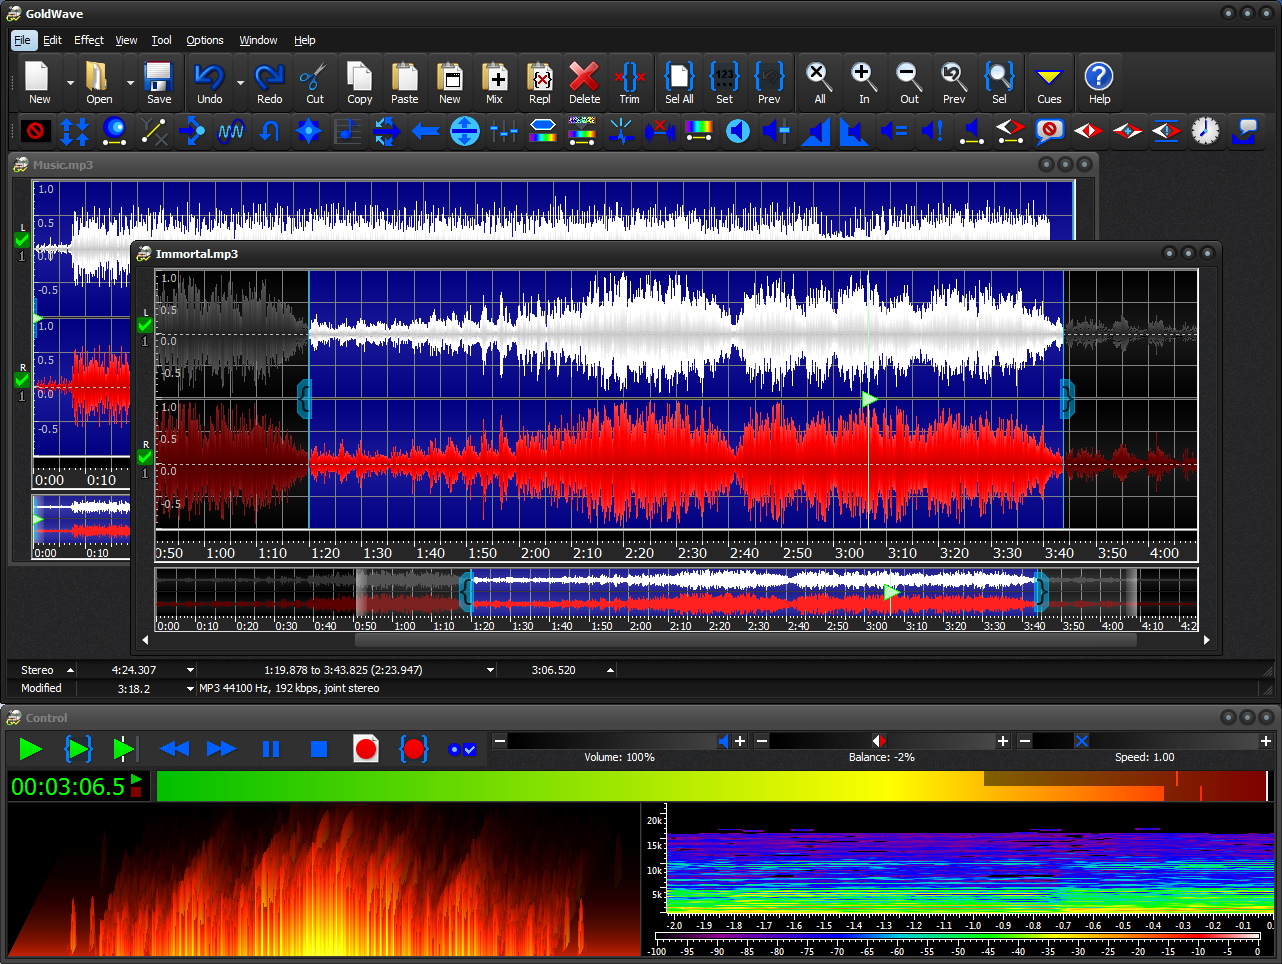 Media asset in full size related to 3dfxzone.it news item entitled as follows: Digital Audio Editing Tools: GoldWave 6.57 - New Features & Bug fixing | Image Name: news32477_GoldWave-Screenshot_2.png